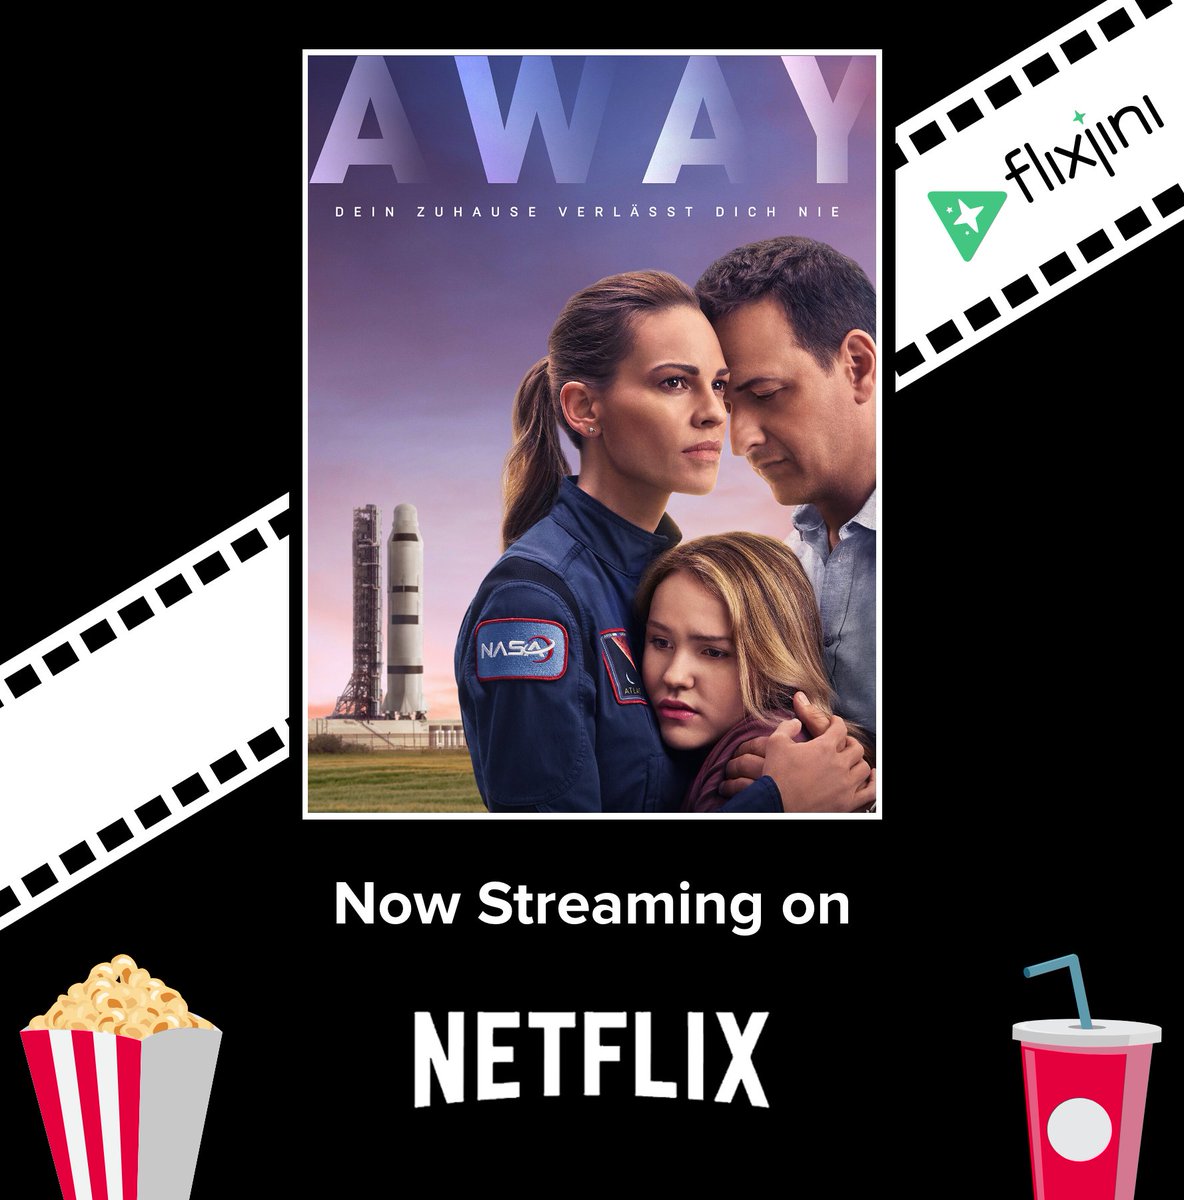 #streamingalert

#away starring #HilarySwank , #JoshCharles, #TalithaBateman is #nowstreaming 
@netflix_in
 , the story of Emma Green a female American astronaut who leaves behind her husband and daughter to lead a team of astronauts to Mars

#netflixandchill #netflixseries